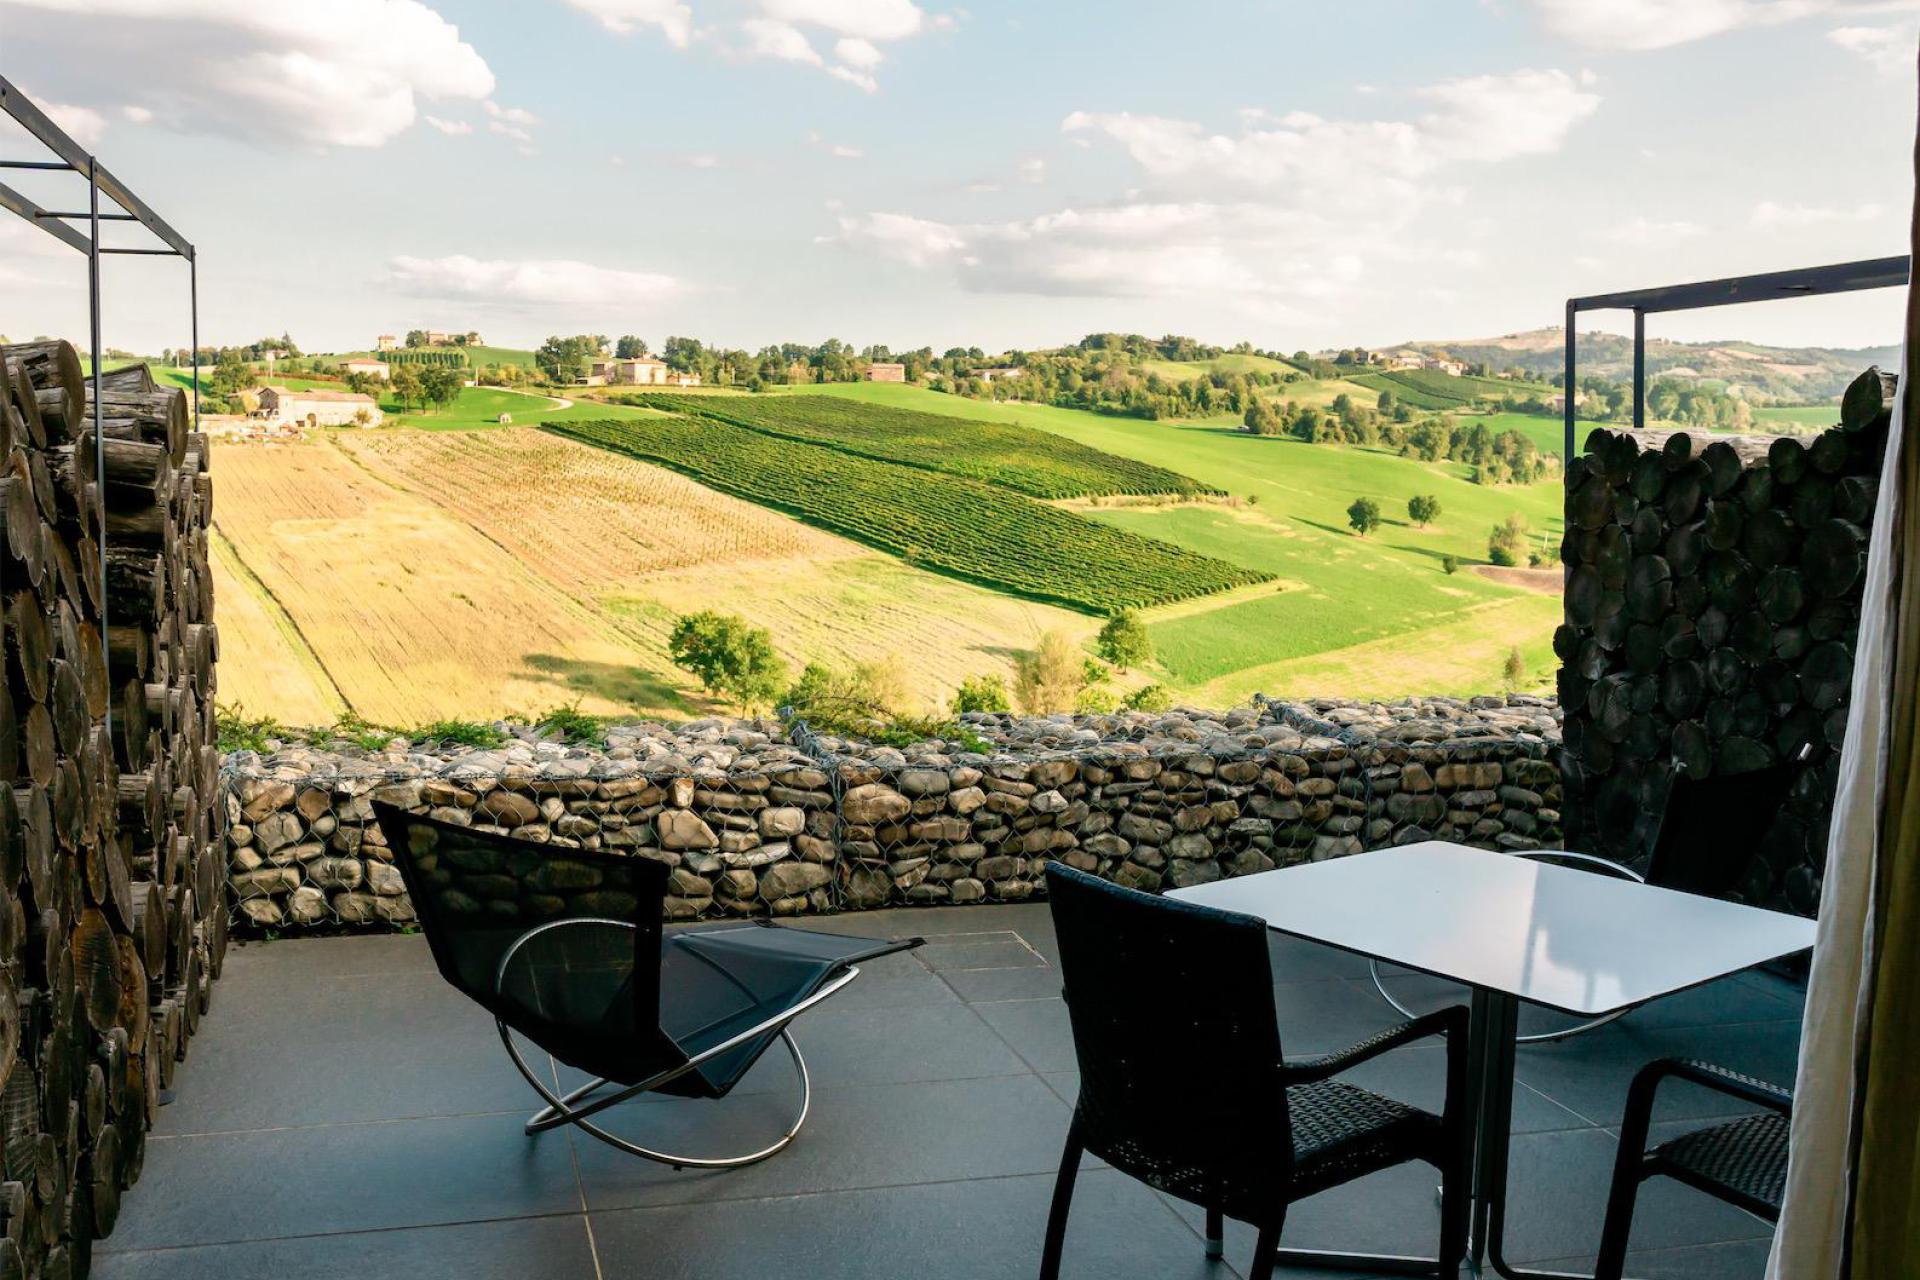 Agriturismo Emilia Romagna Agriturismo with relaxed atmosphere and good cuisine